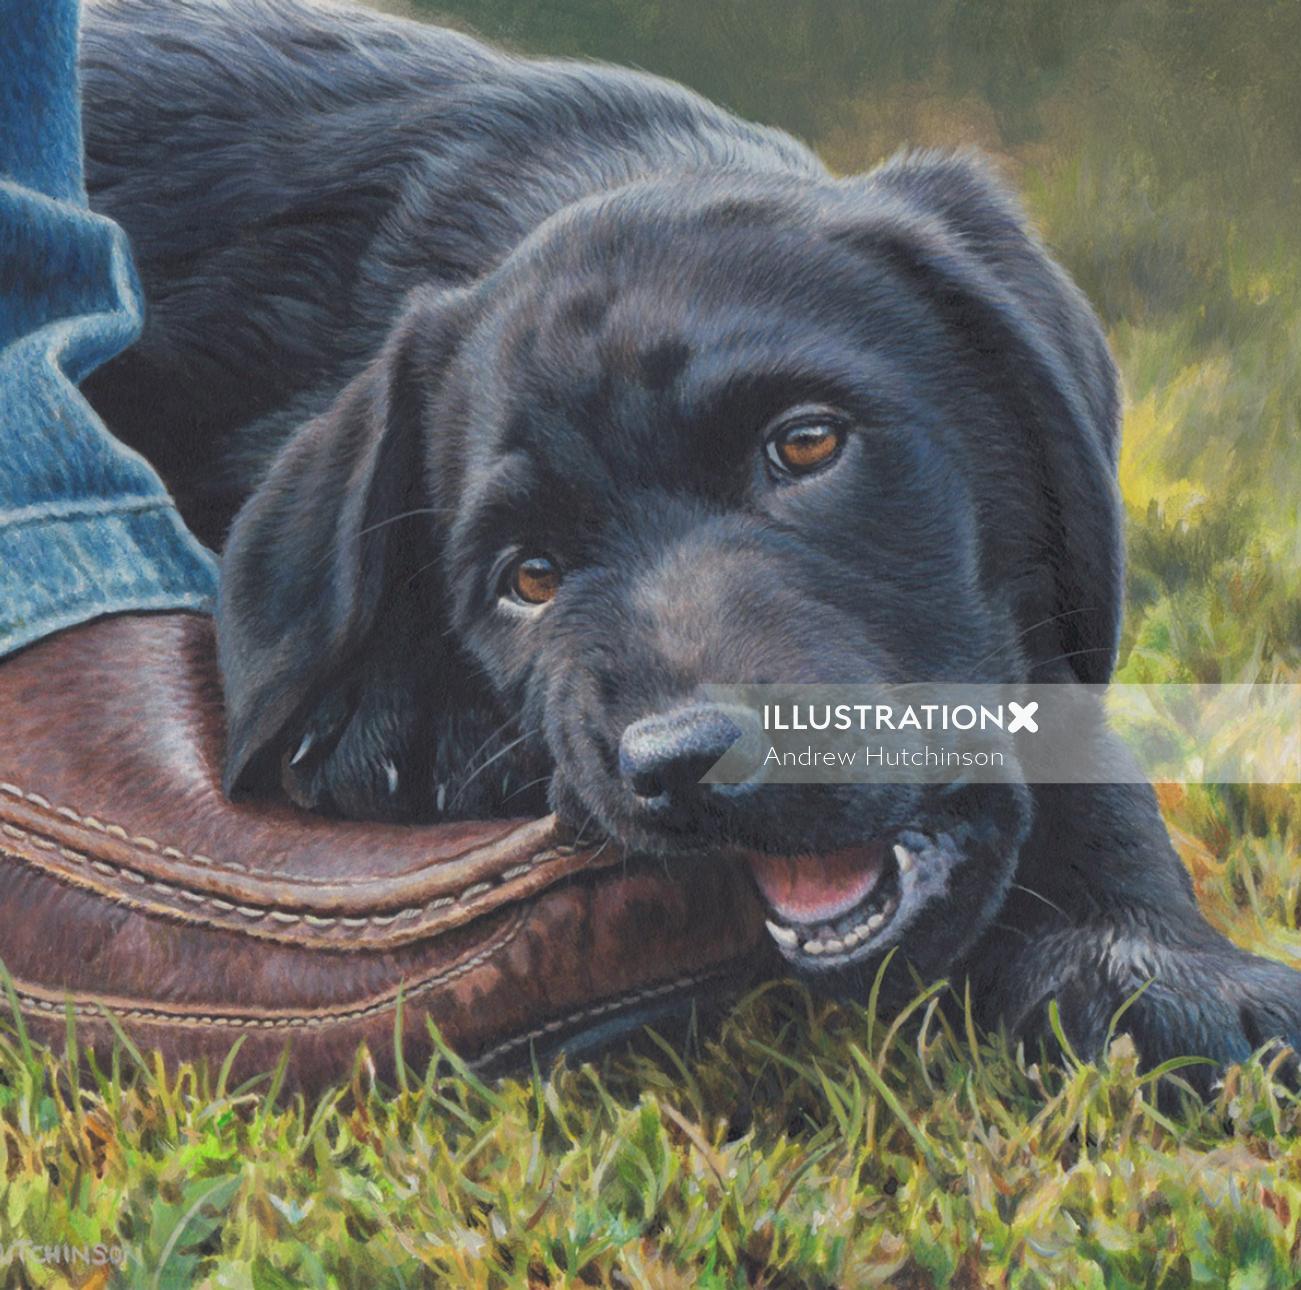 Pup of a Black Labrador painted in acrylic